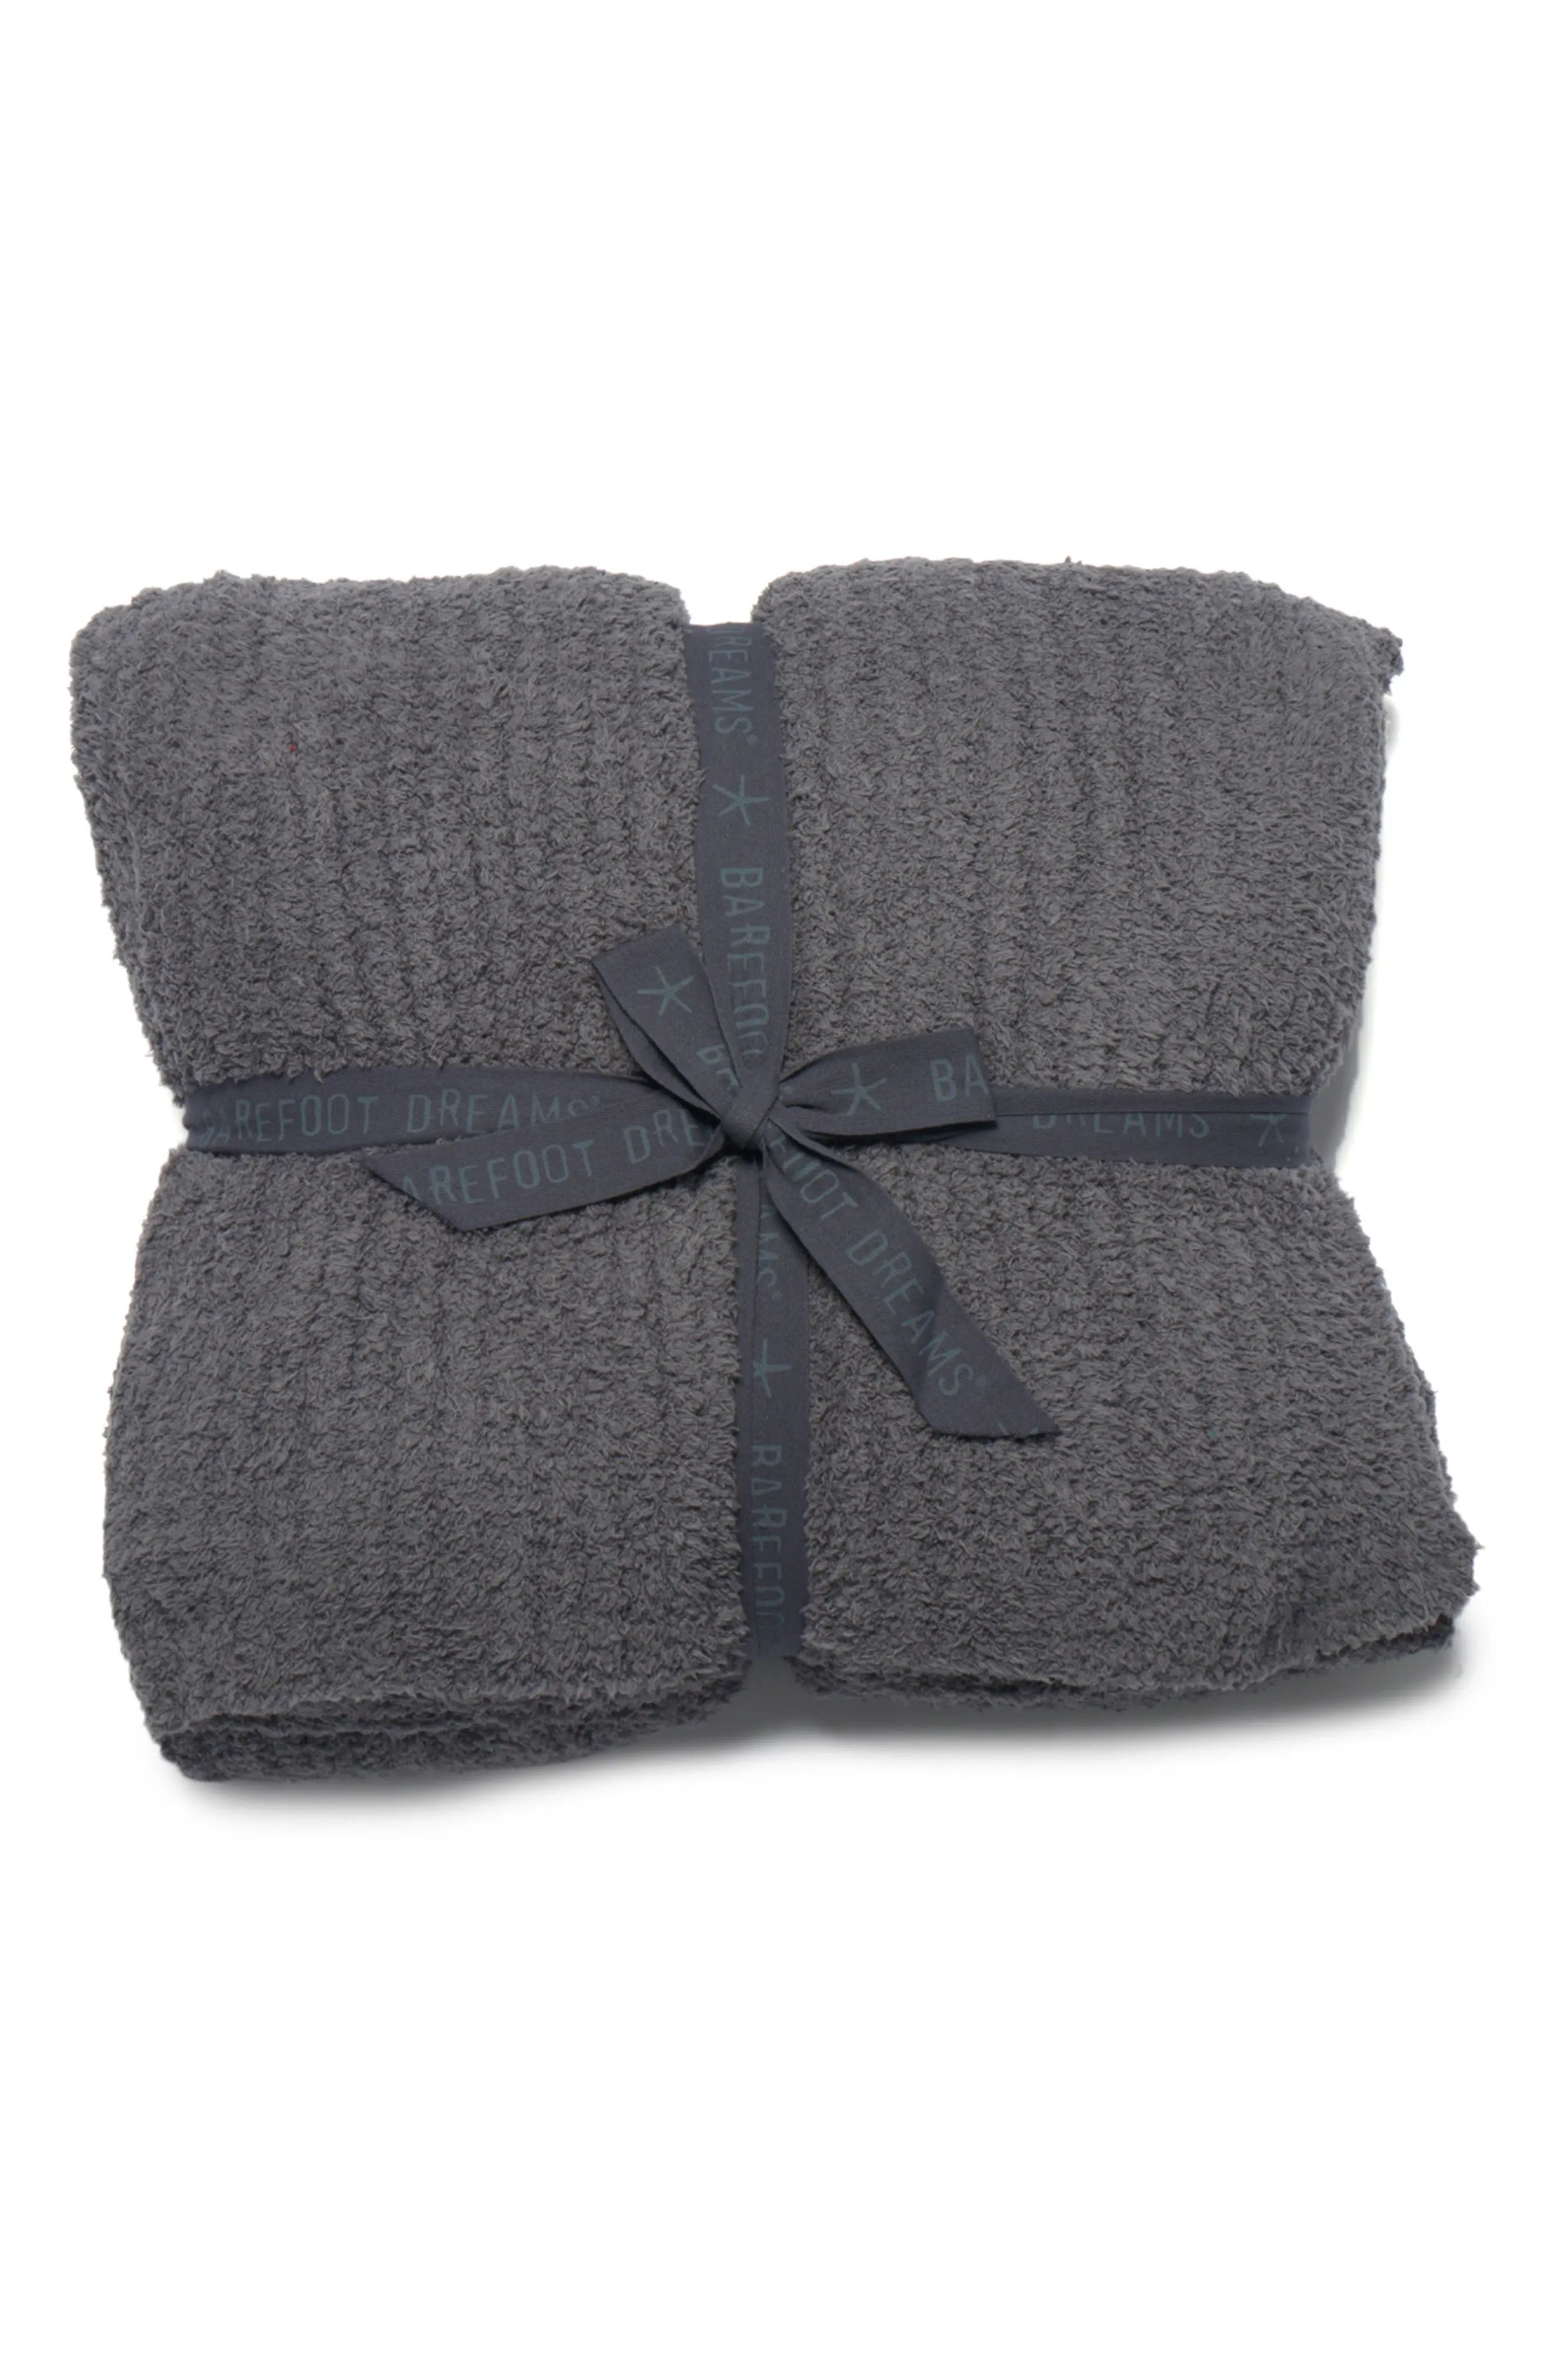 Barefoot Dreams(R) CozyChic(R) Ribbed Throw Blanket in Graphite at Nordstrom, Size King | Nordstrom